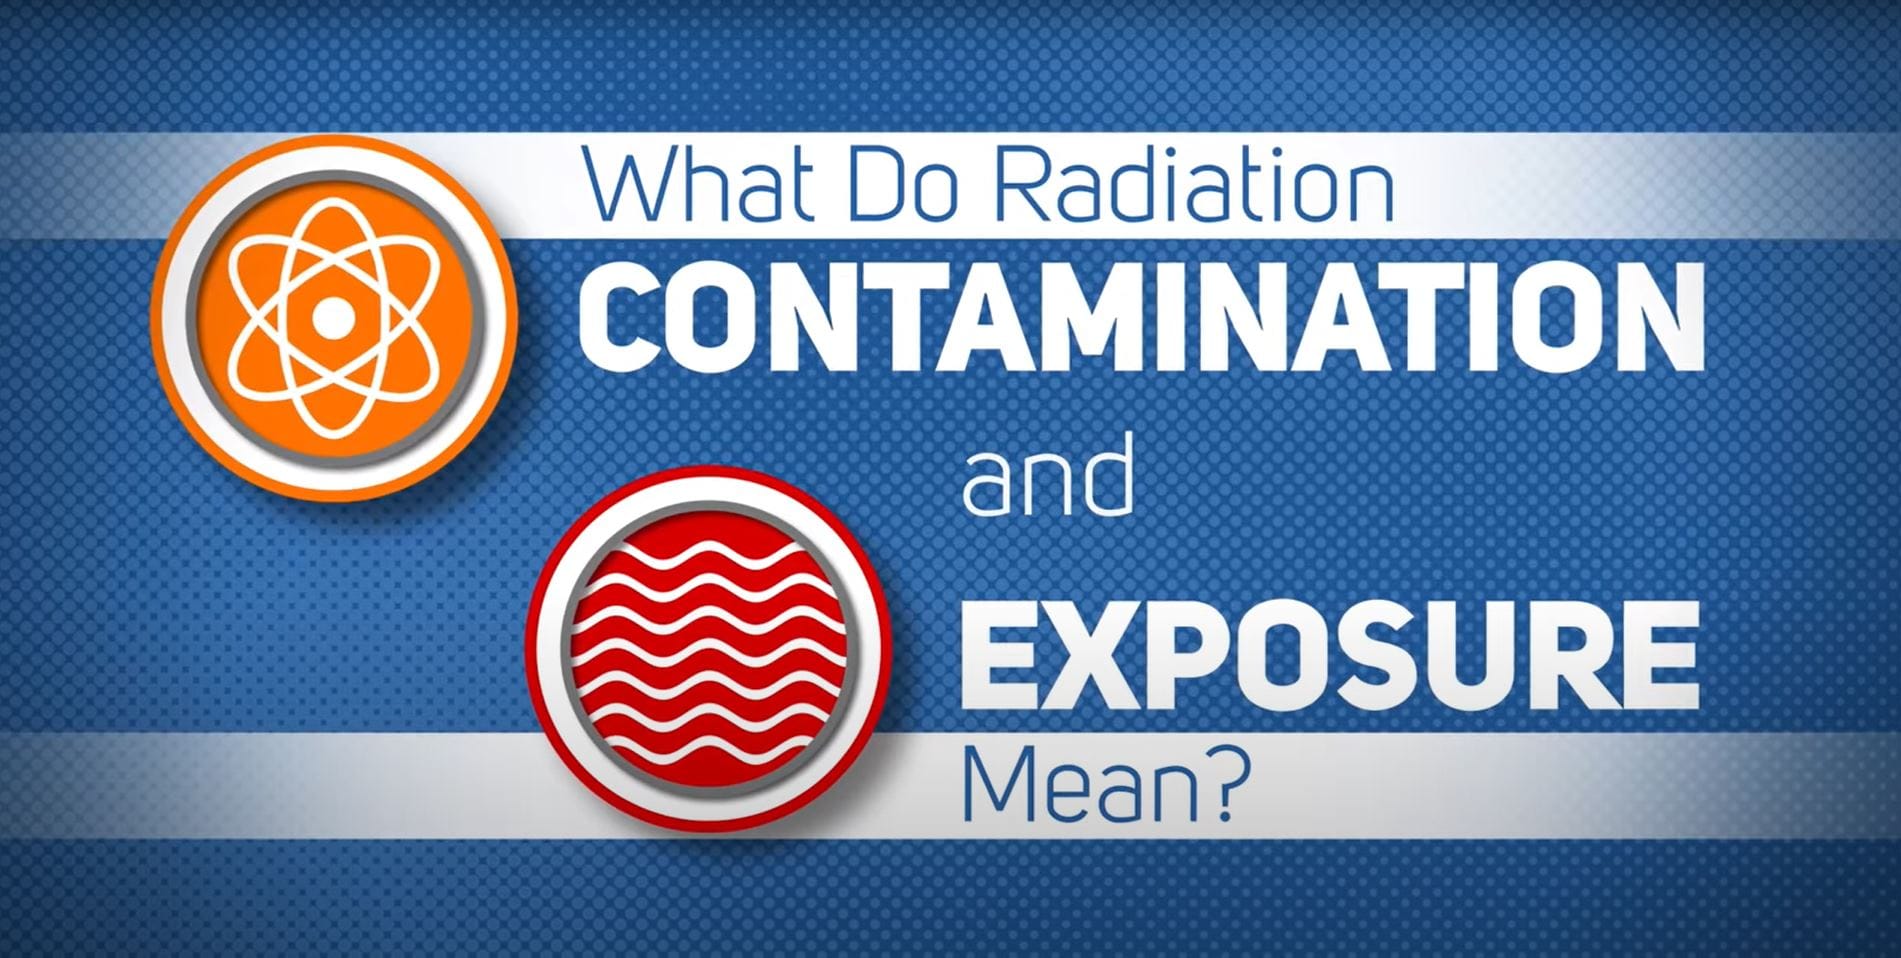 Screenshot showing the question "what do radiation contamination and exposure mean?"